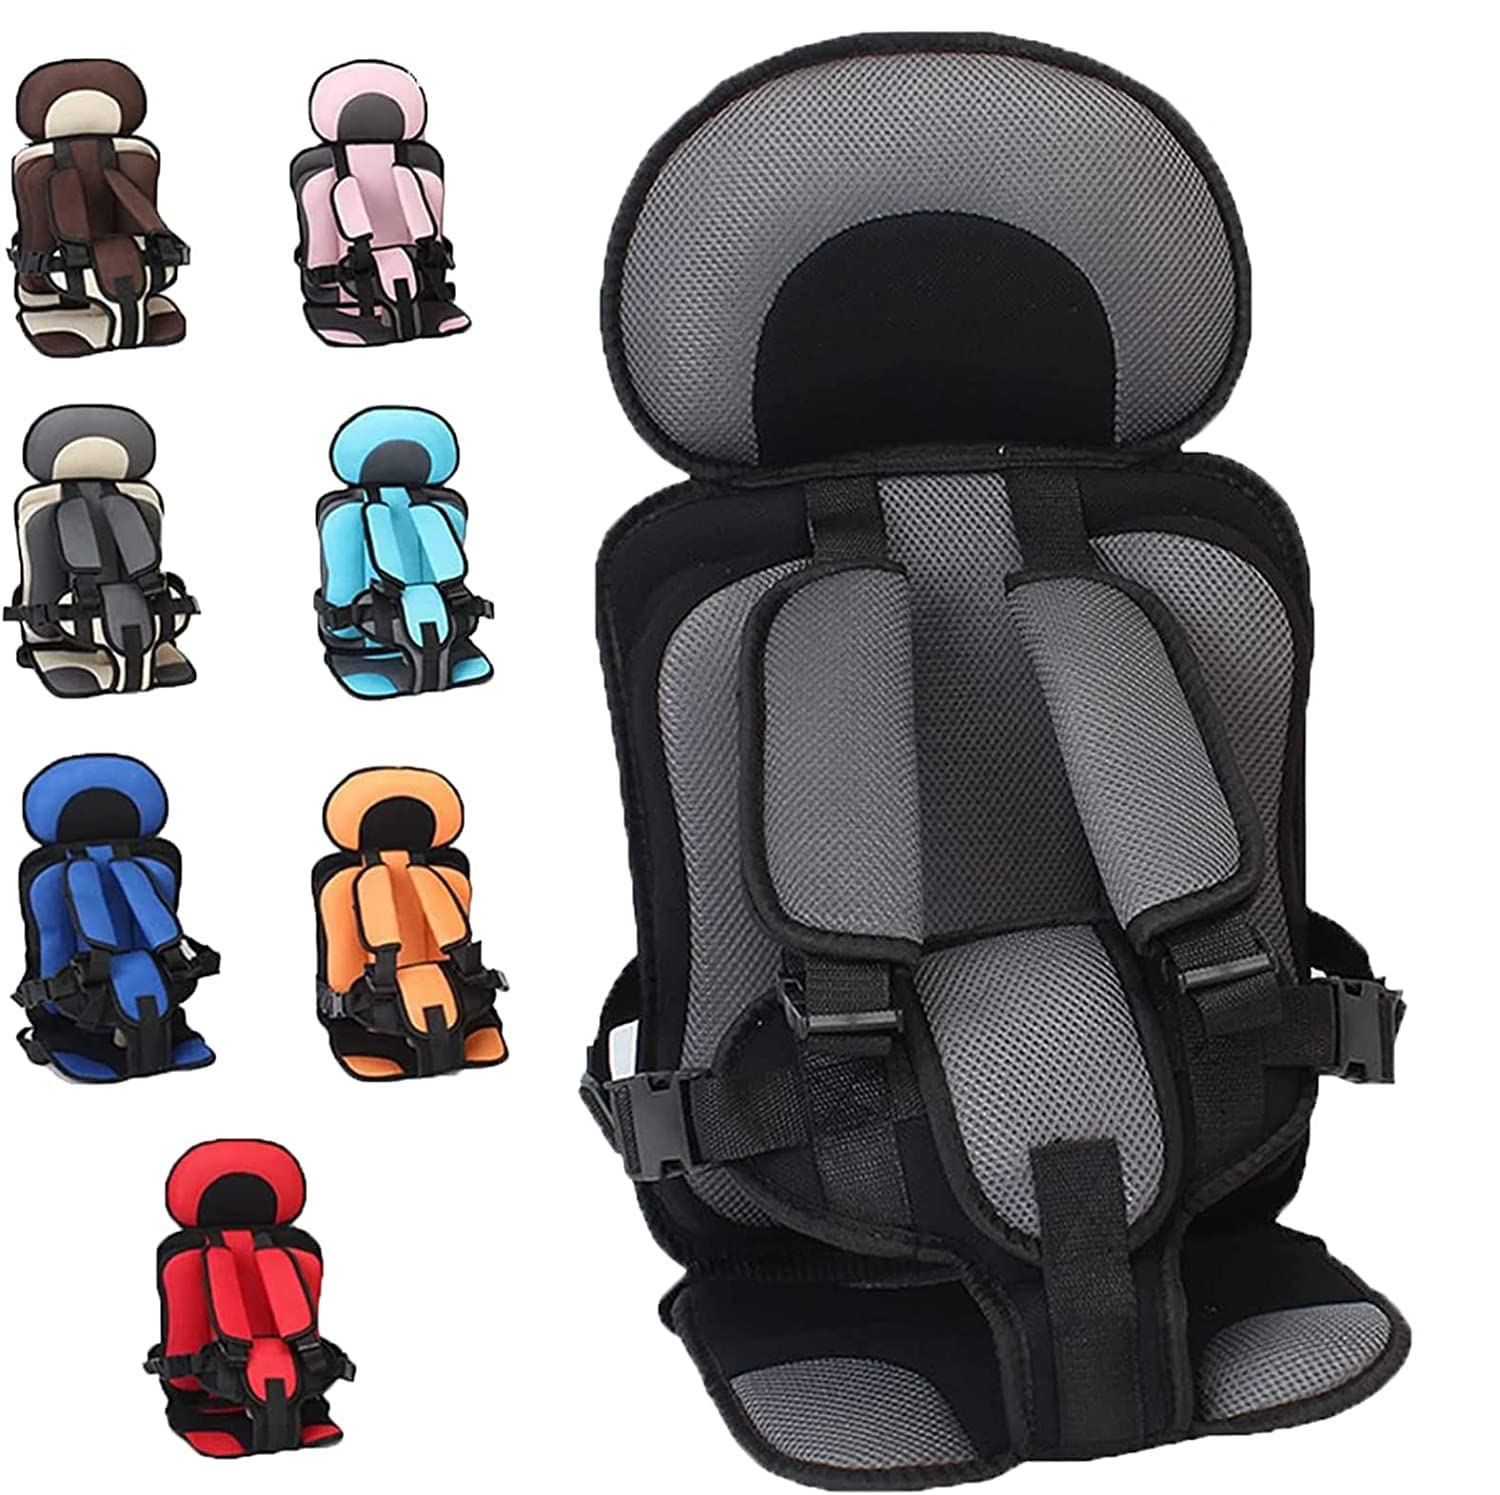 Auto Child Safety Seat Simple Car Portable Seat Belt,Foldable Car Seat Protection Travel Accessories for Kids 0-12,Car Seat Liner for Infant (Black, Big(22.1 * 13.4 * 9.5in))